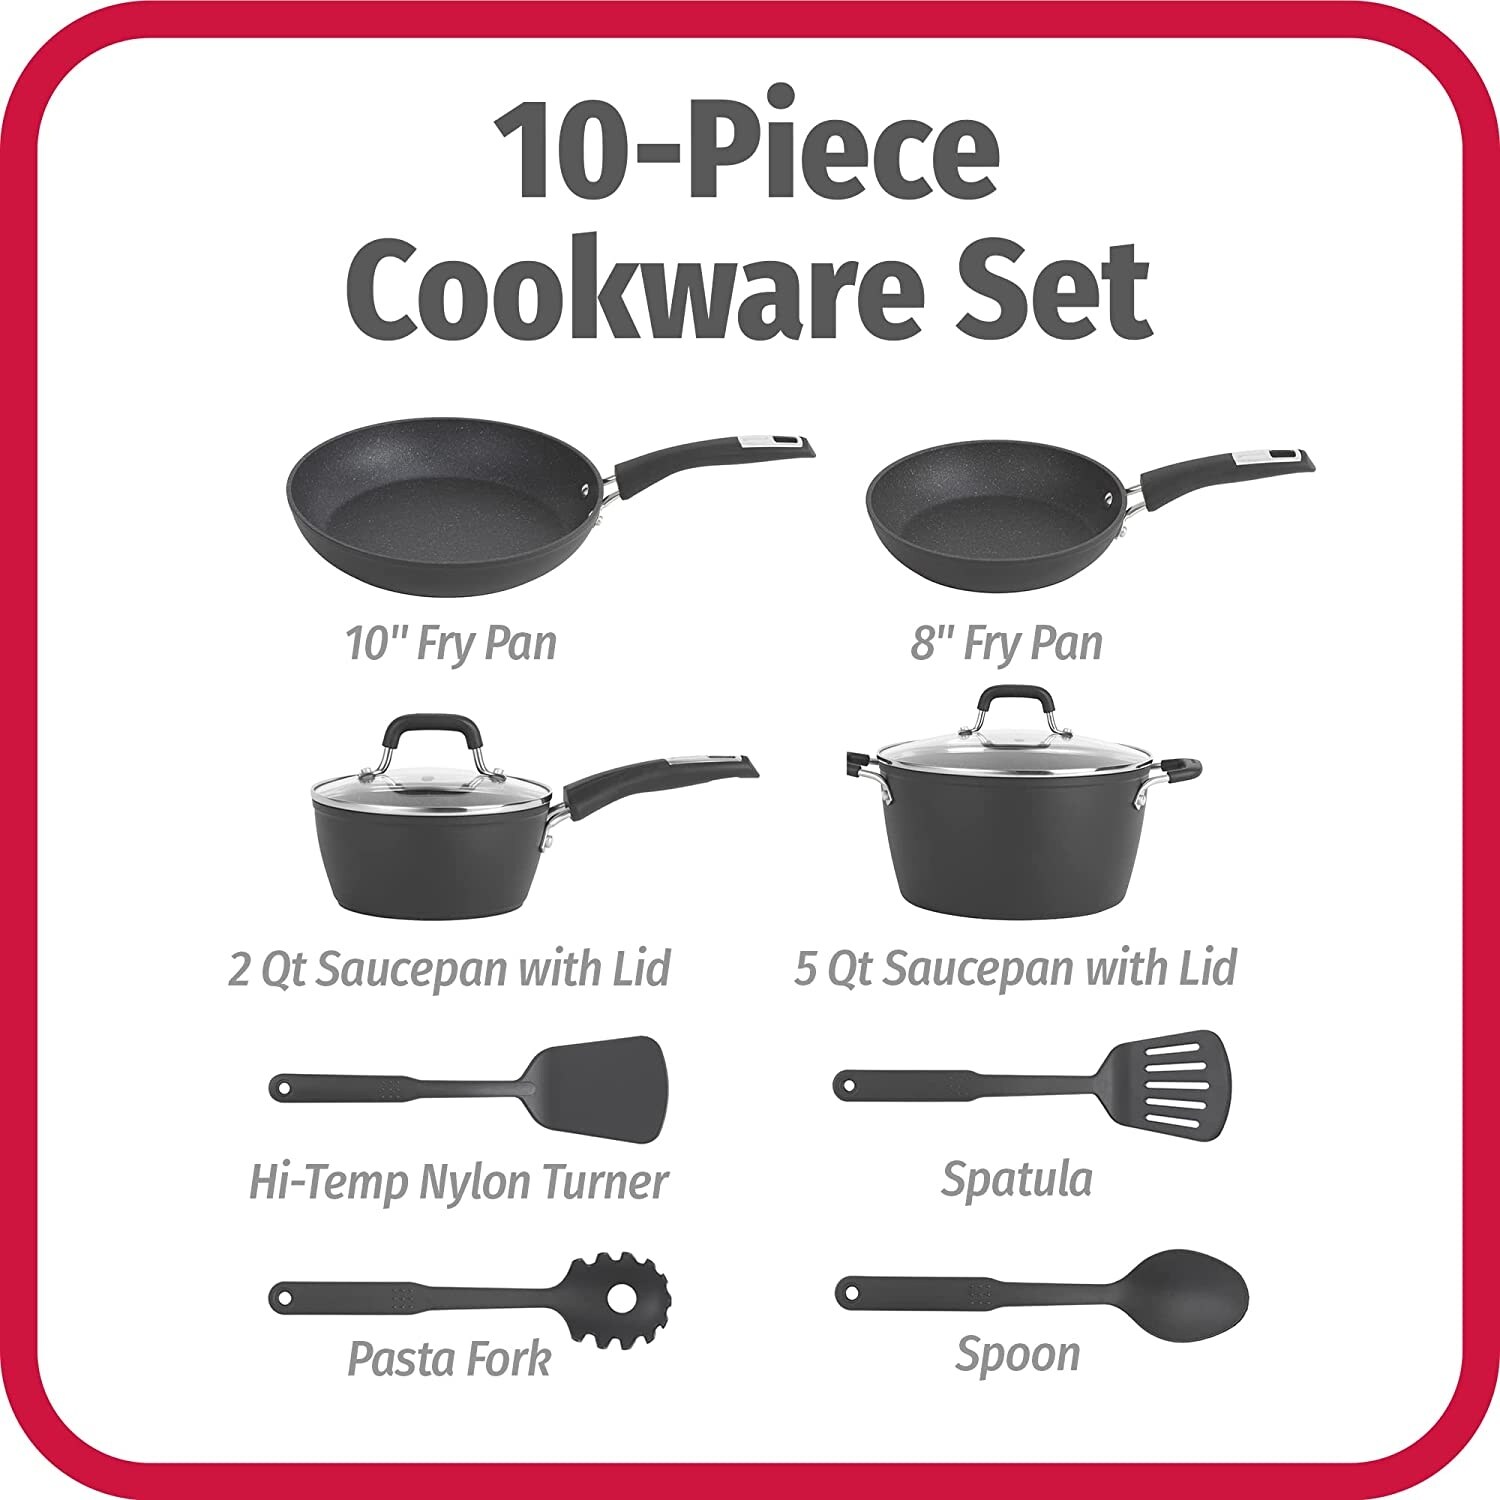 Goodcook 12-piece Micro-divot Nonstick Aluminum Cookware Set With Pans,  Dutch Oven, Spoon And Turner, Black,black : Target